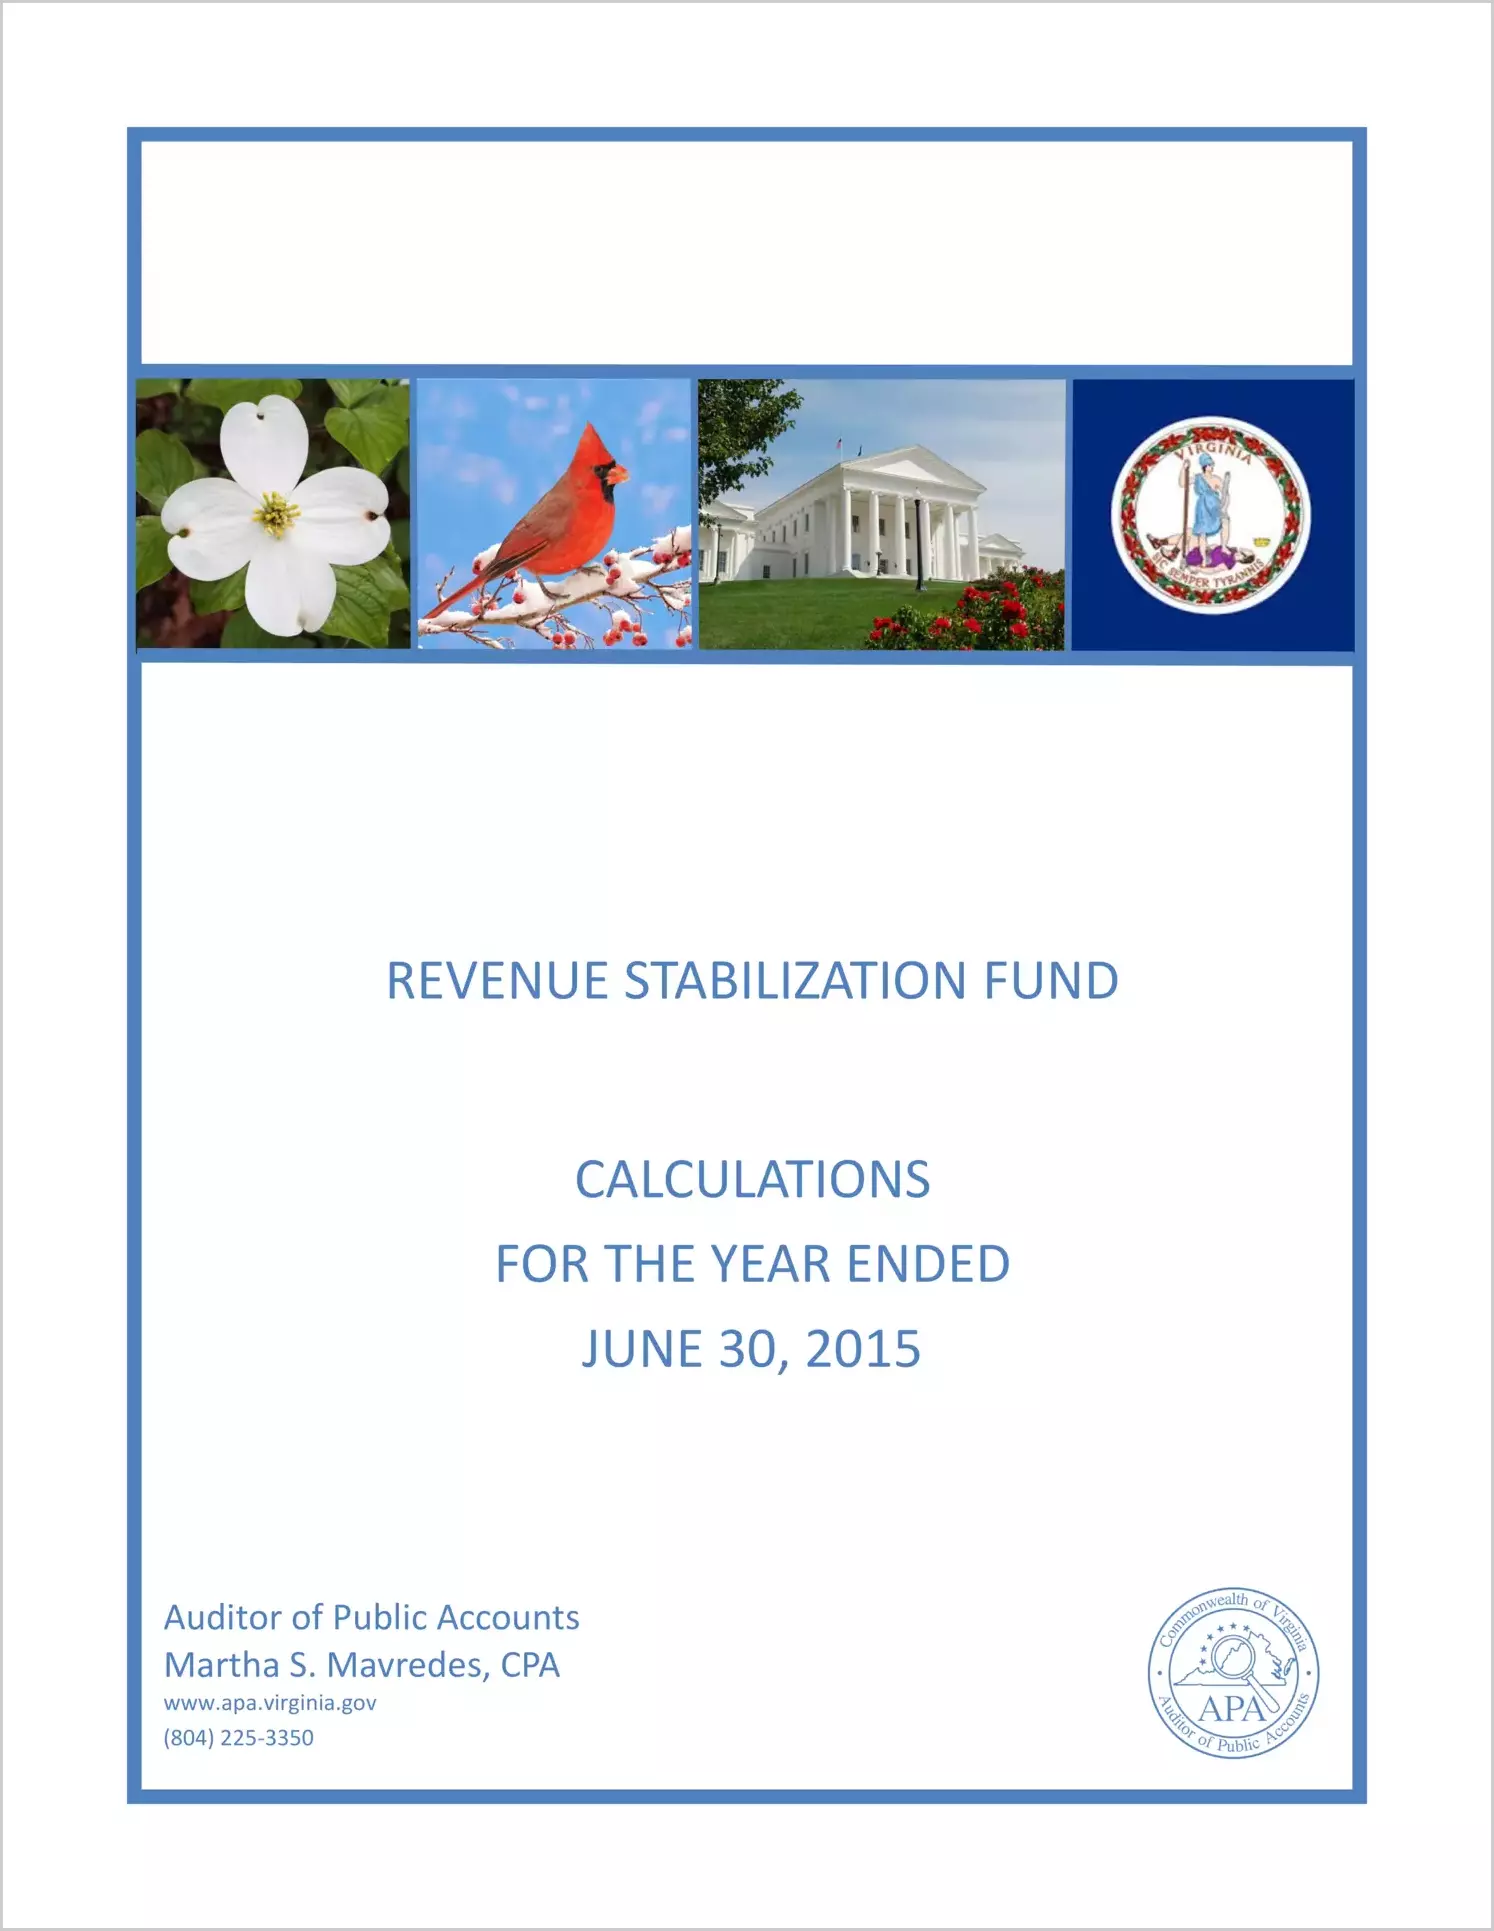 Revenue Stabilization Fund Calculations for the year ended June 30, 2015